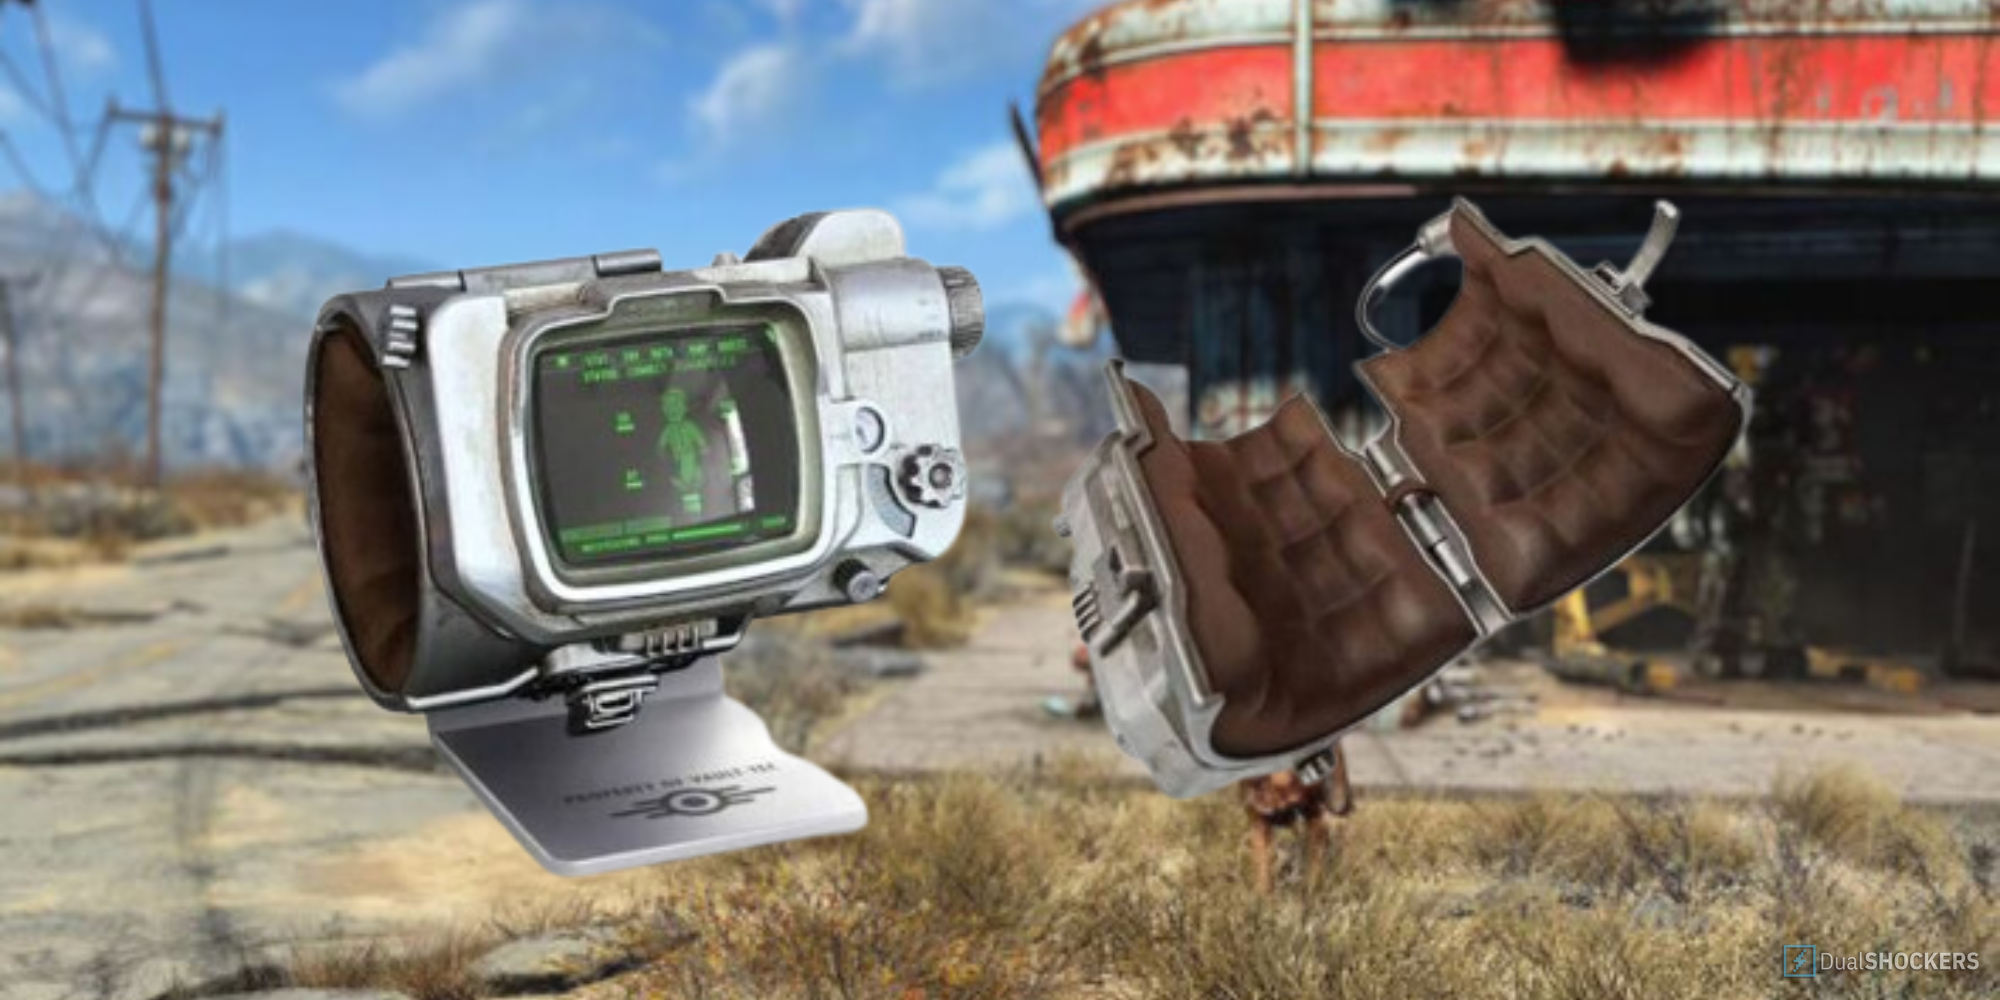 Bethesda Commemorates Fallout TV Series With Epic New Pip-Boy